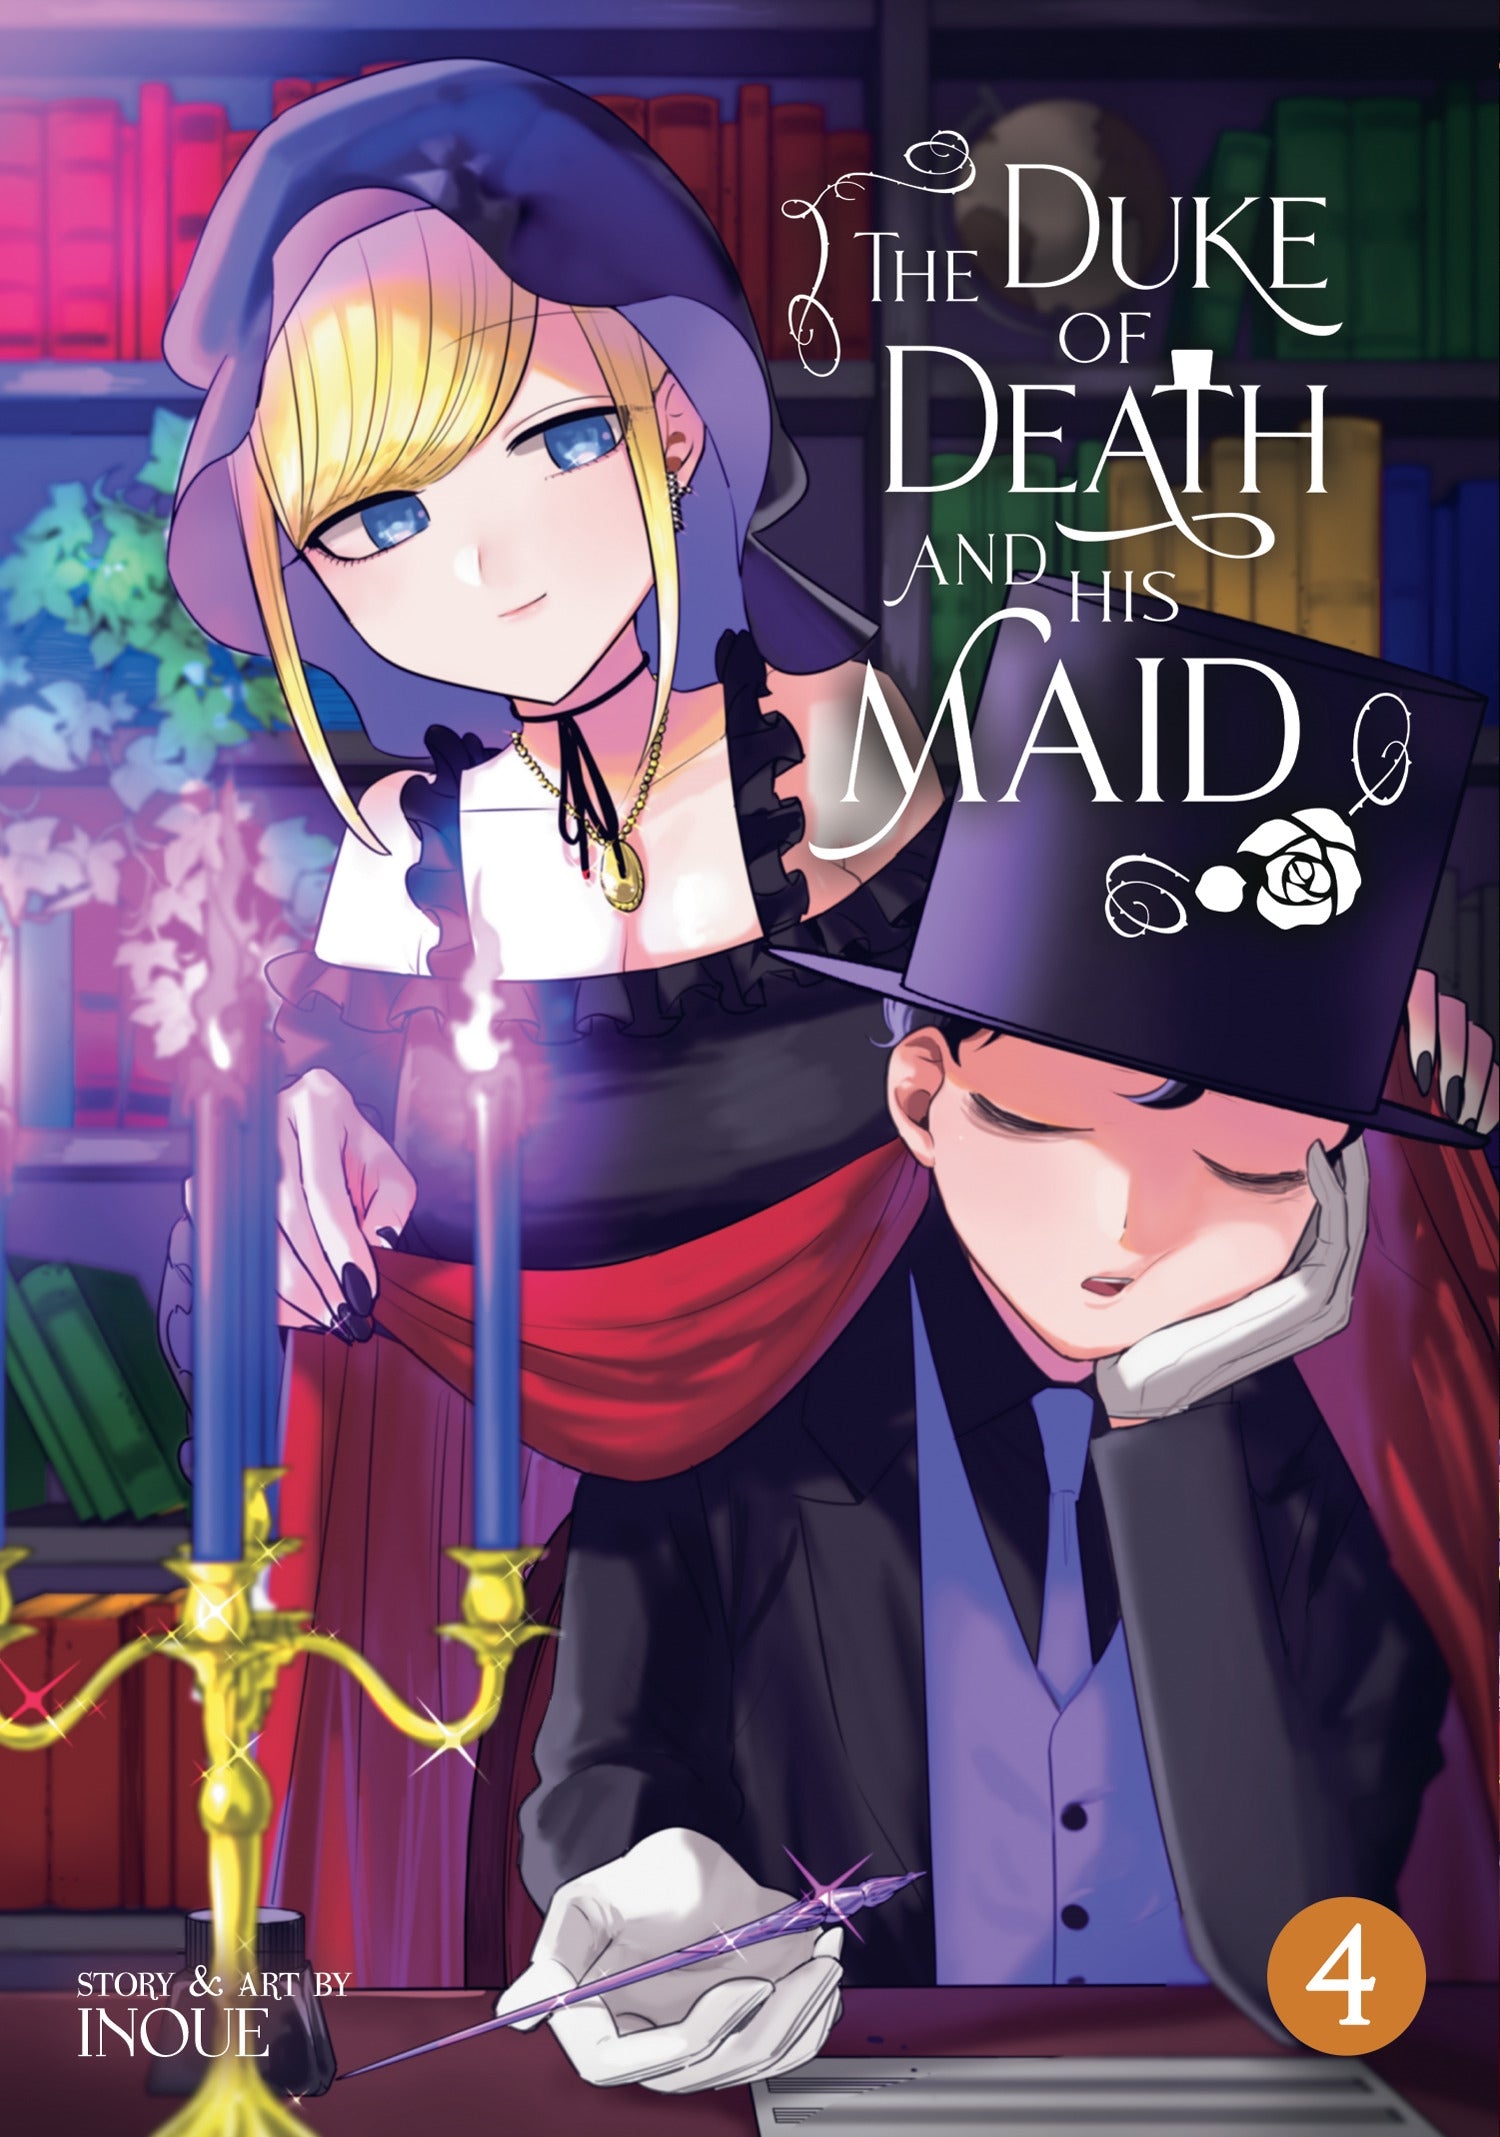 The Duke of Death and His Maid - Vol. 4